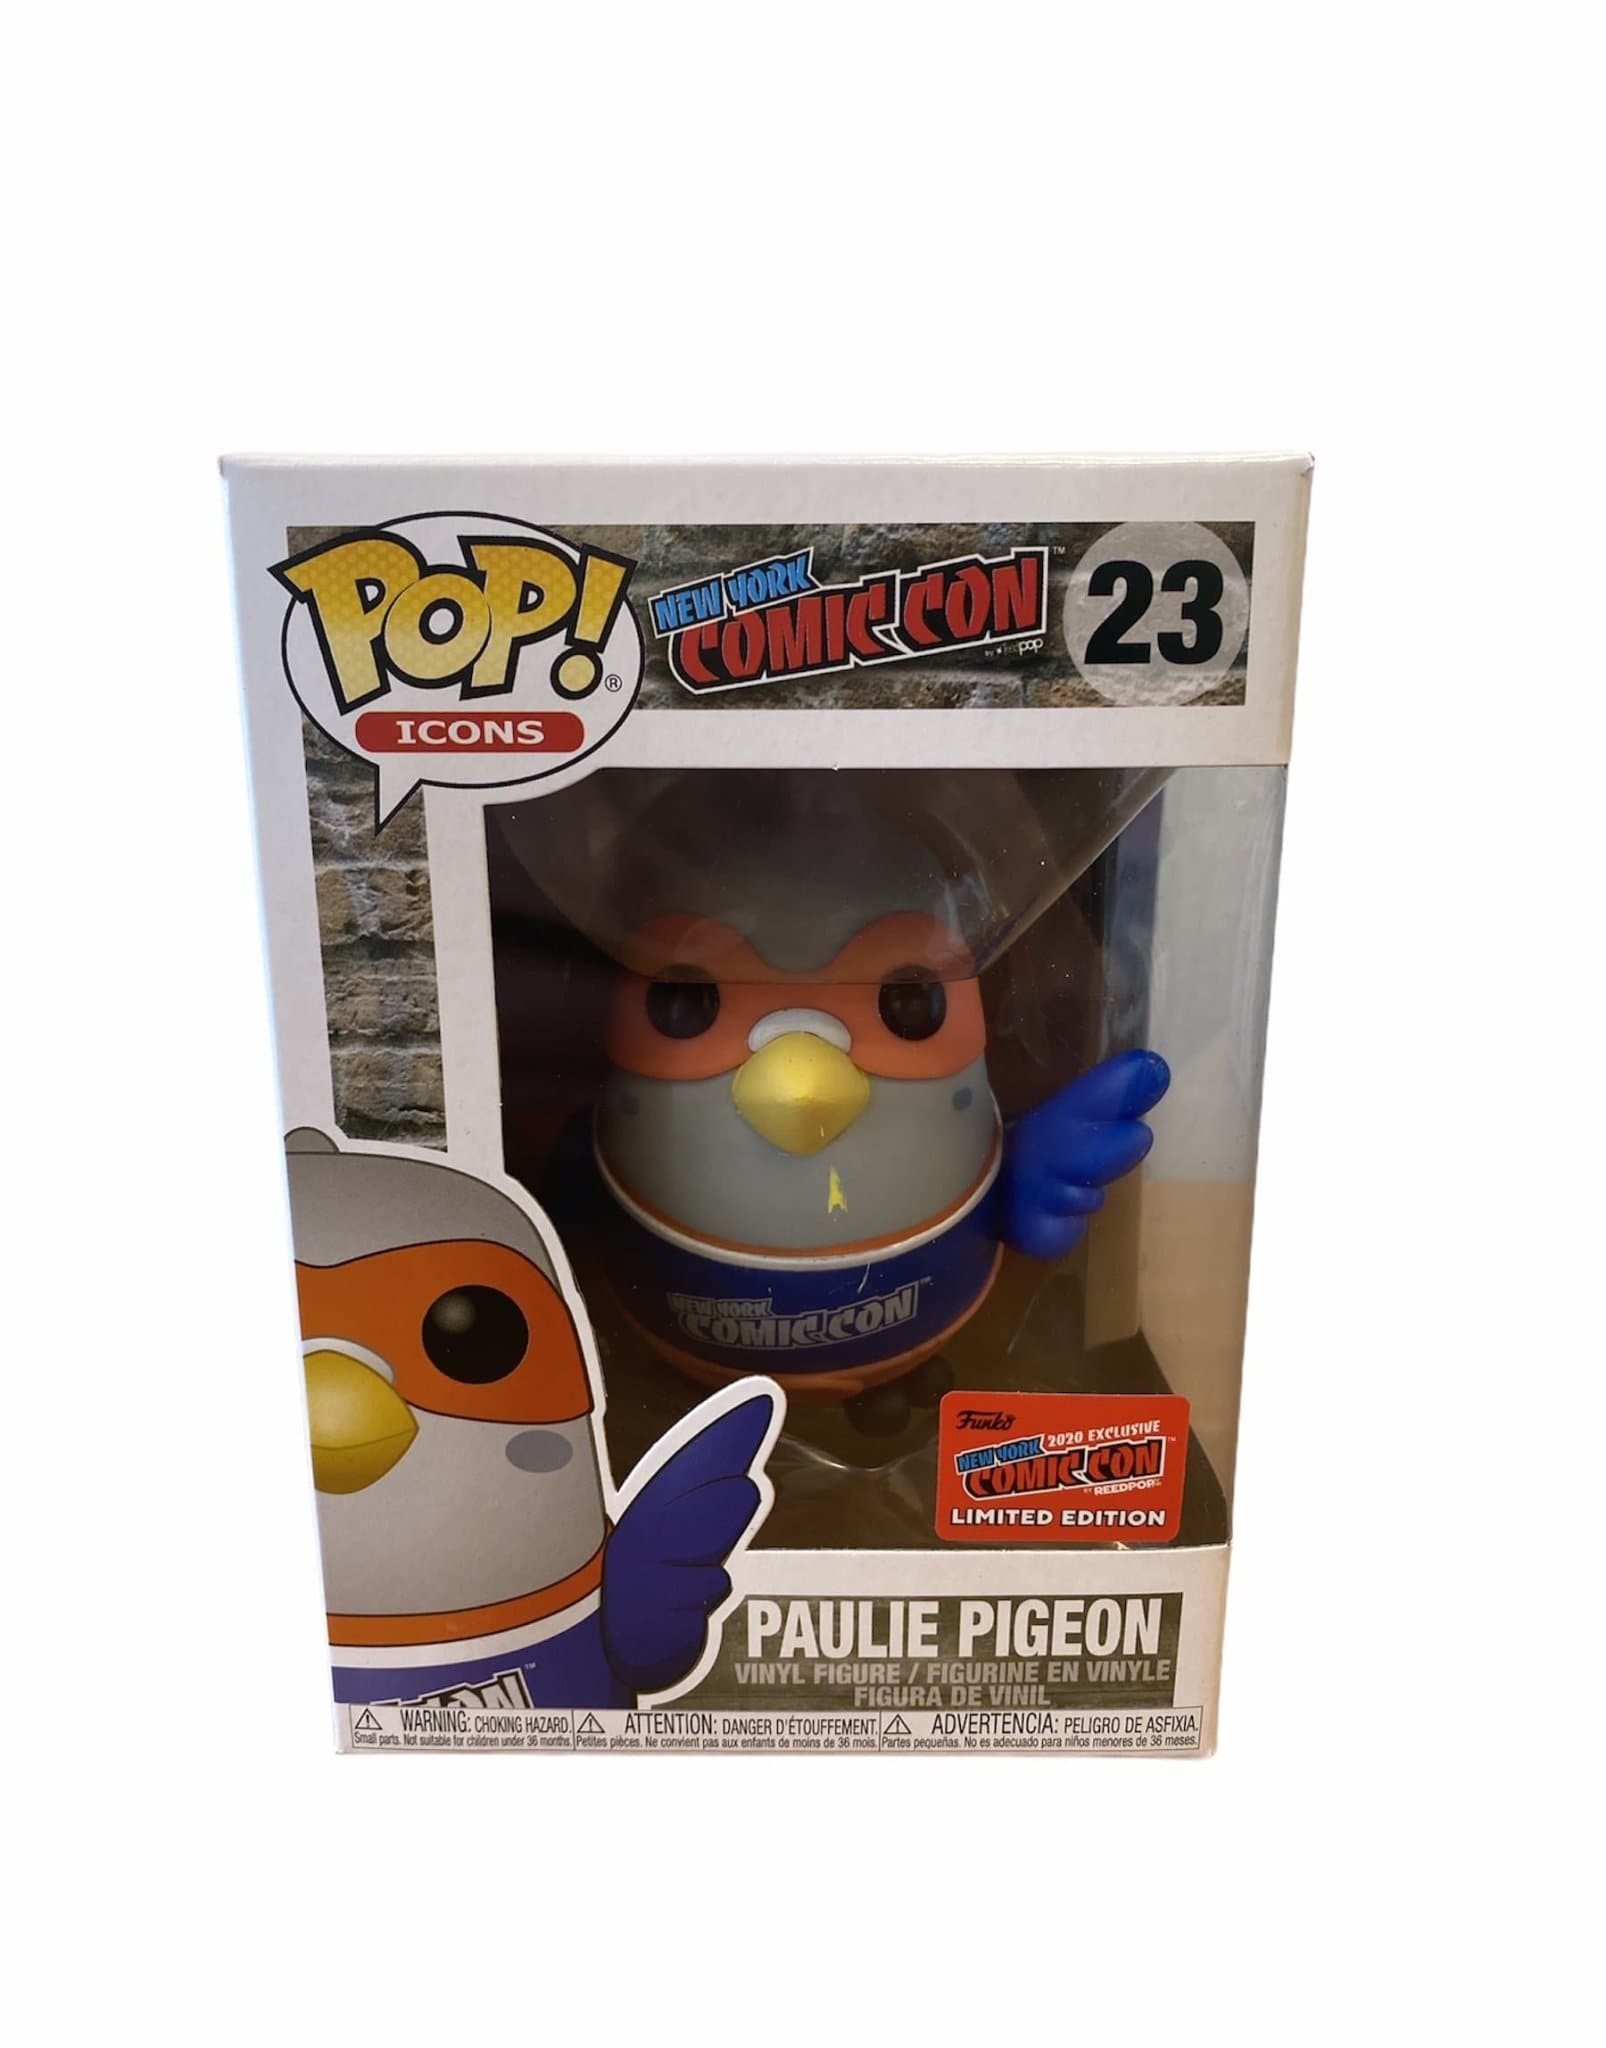 Paulie Pidgeon #23 Funko Pop! Icons: New York Comic Con. NYCC 2020 Official Convention Exclusive. Condition 8.5/10 - Pop Figures